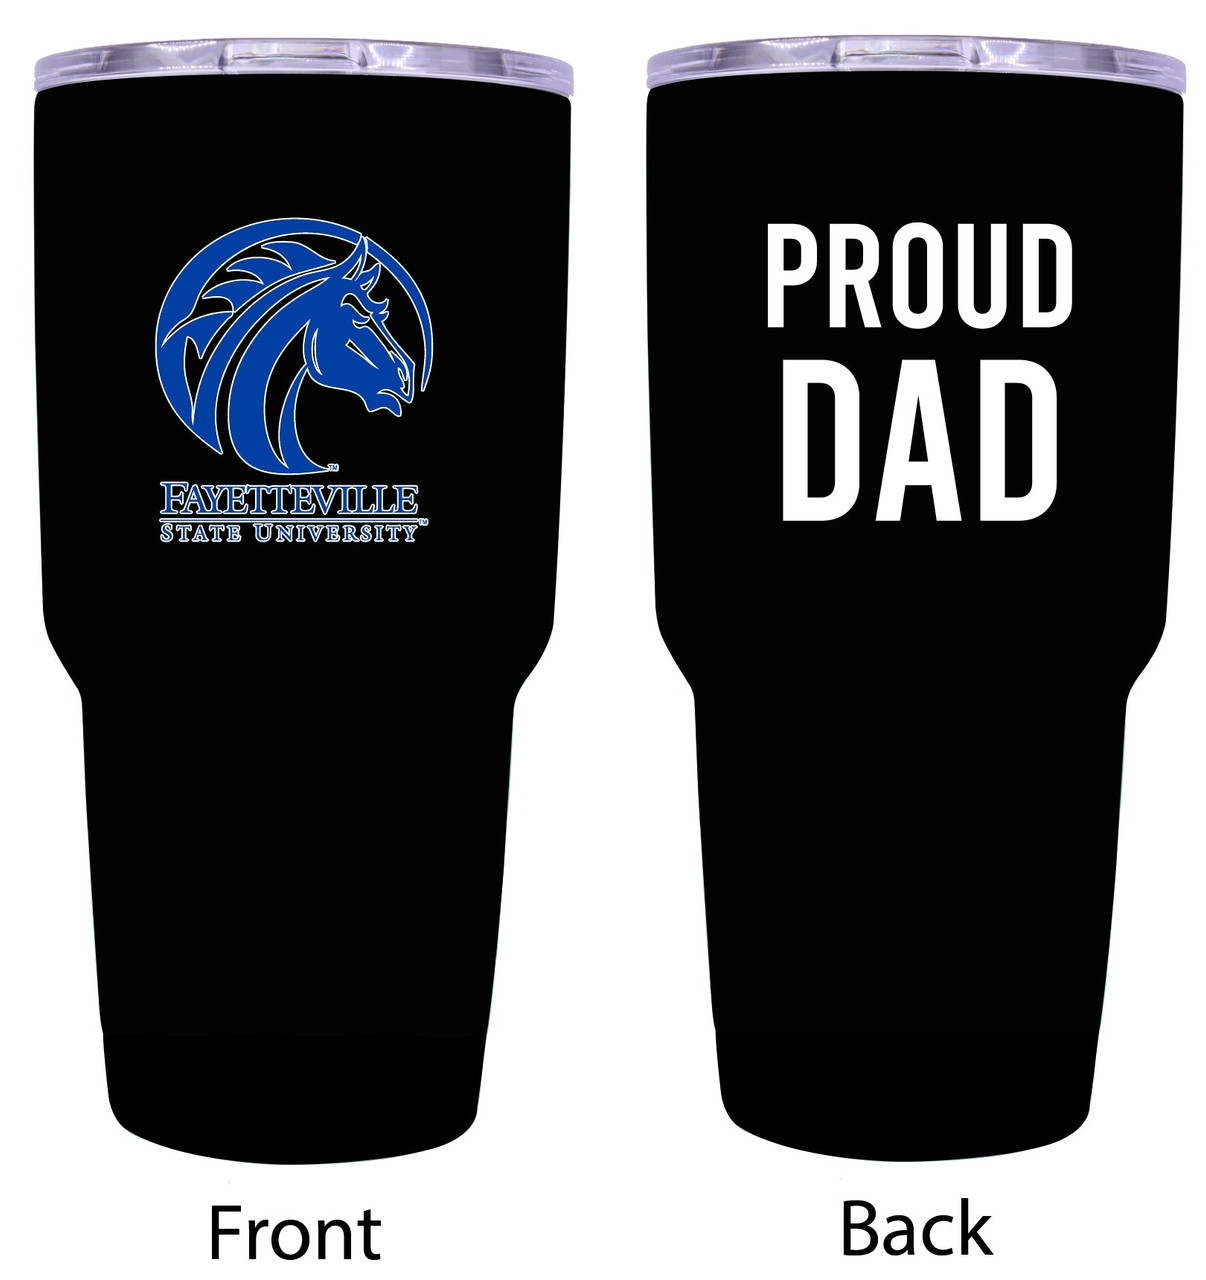 Fayetteville State University Proud Dad 24 oz Insulated Stainless Steel Tumblers Black.